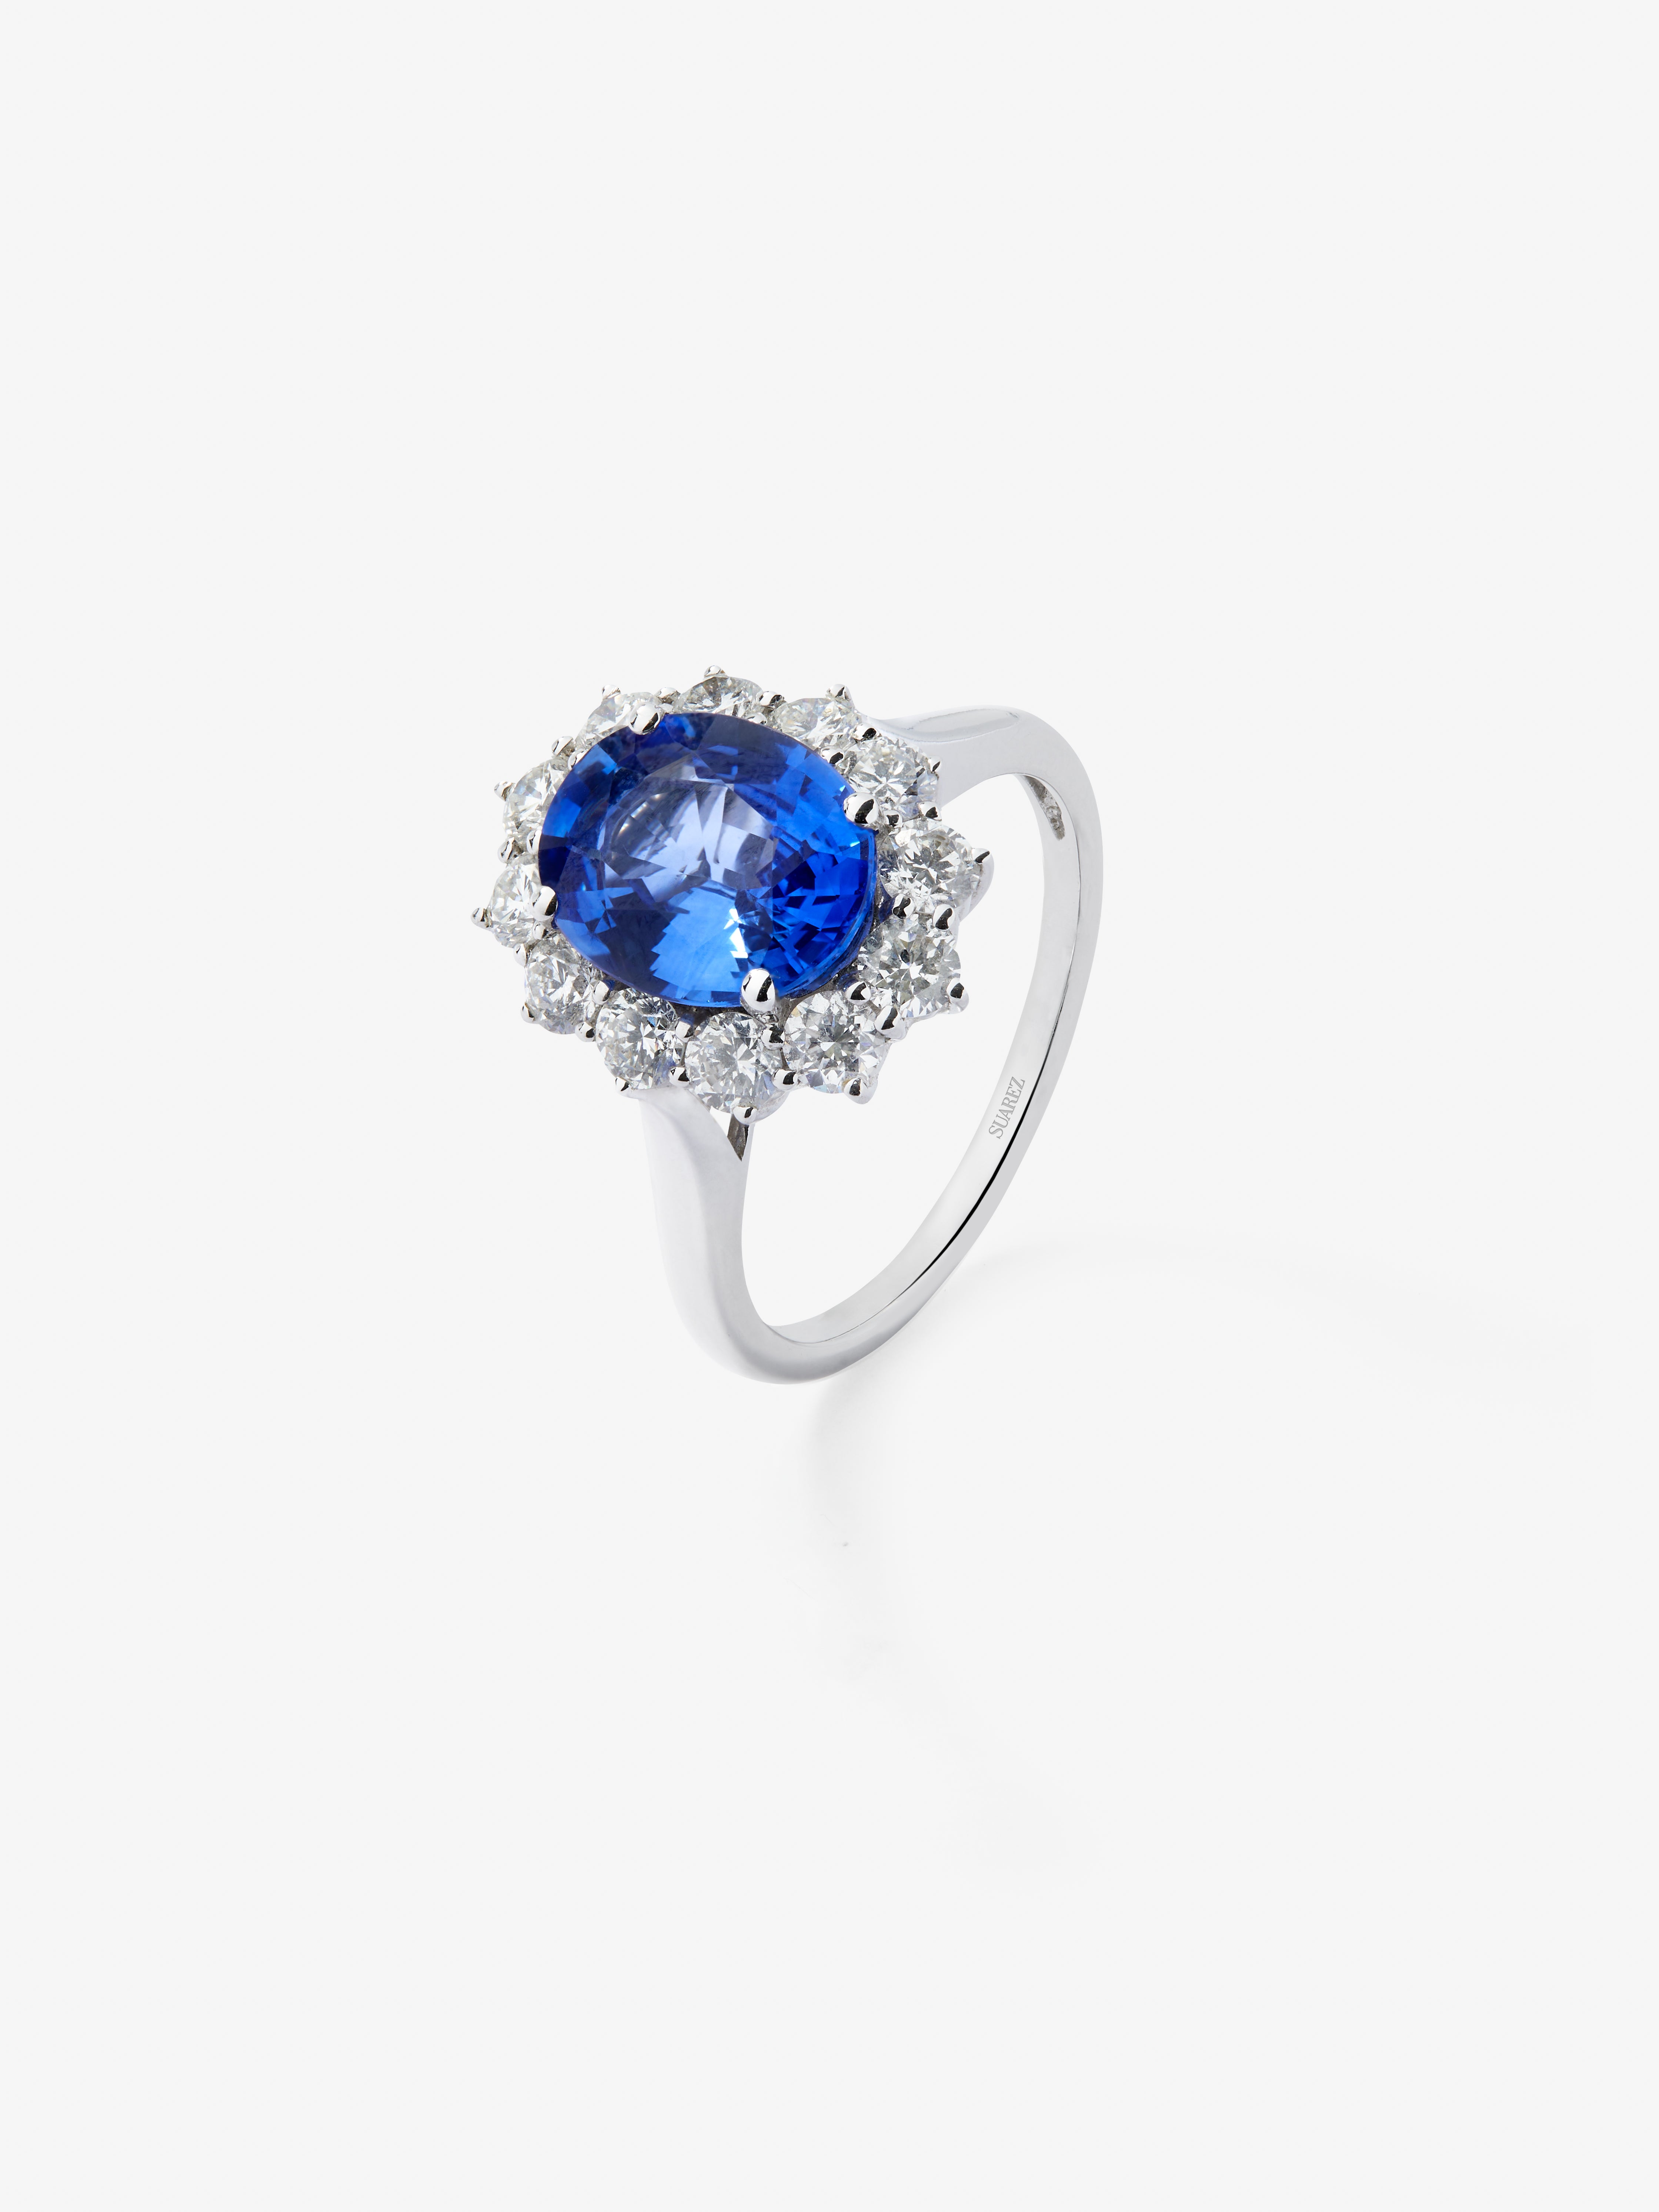 18K white gold ring with oval-cut royal blue sapphire of 2.33 cts and a border of 12 brilliant-cut diamonds with a total of 0.52 cts